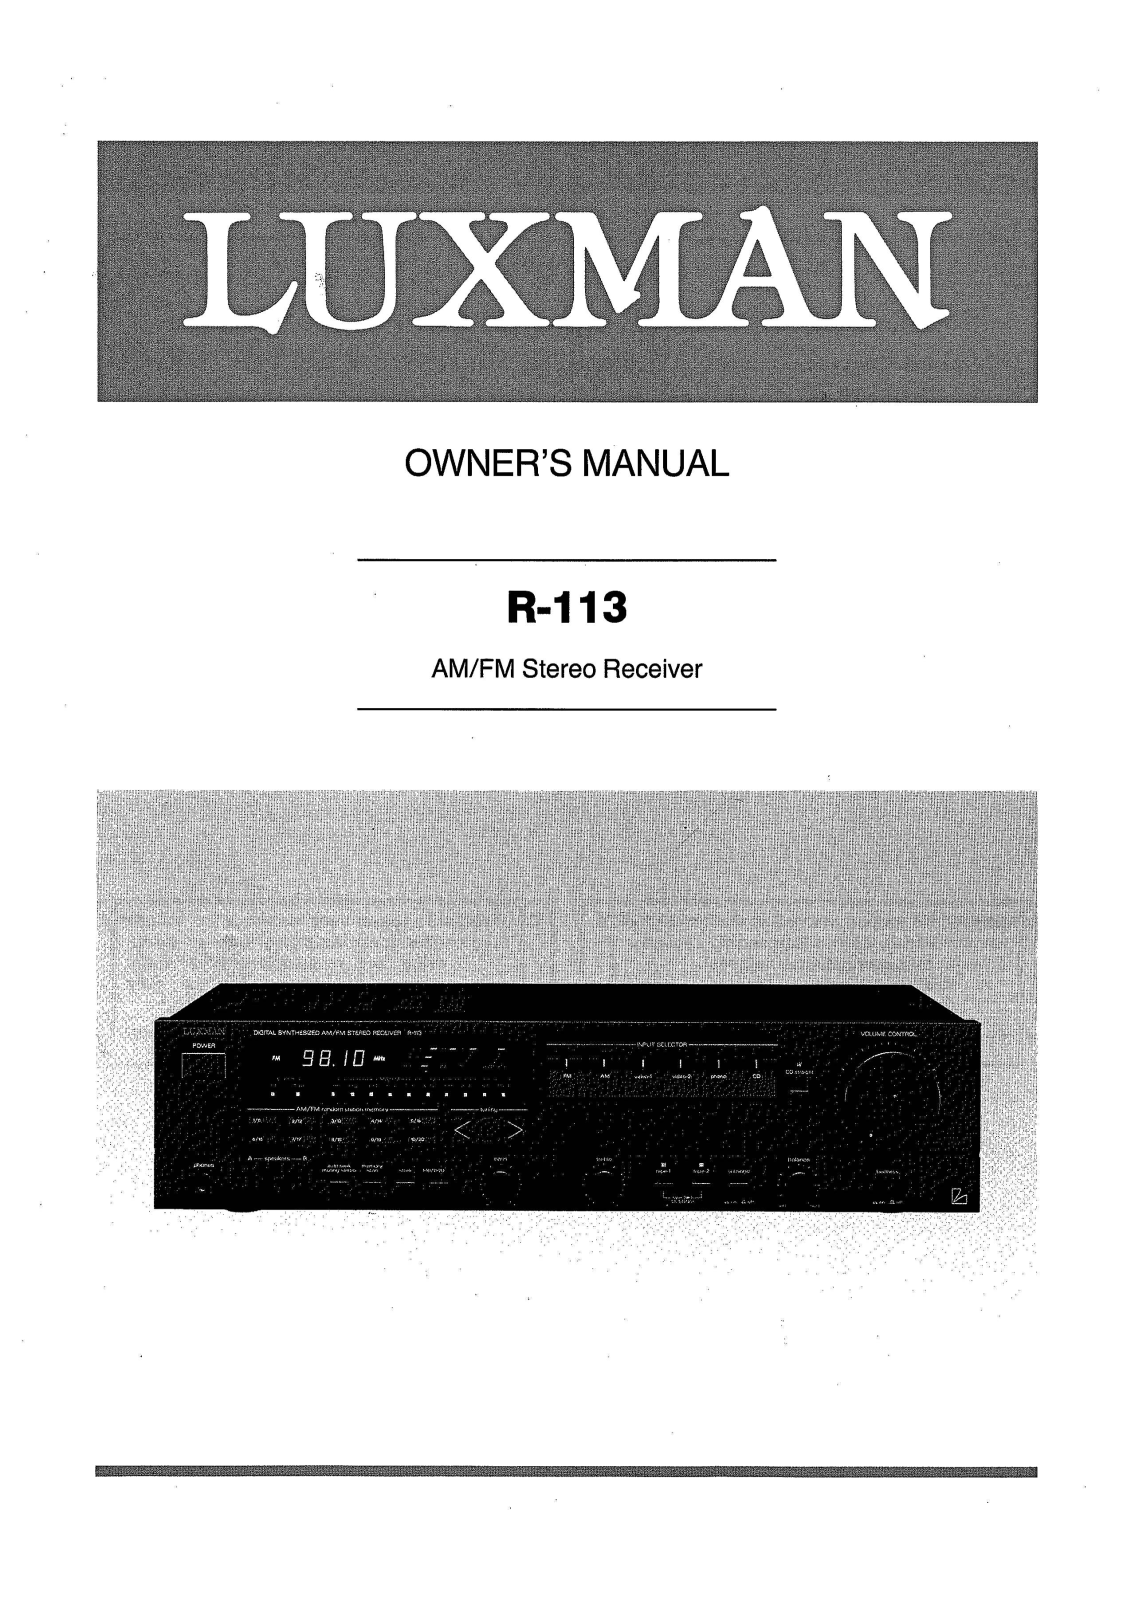 Luxman R-113 Owners Manual